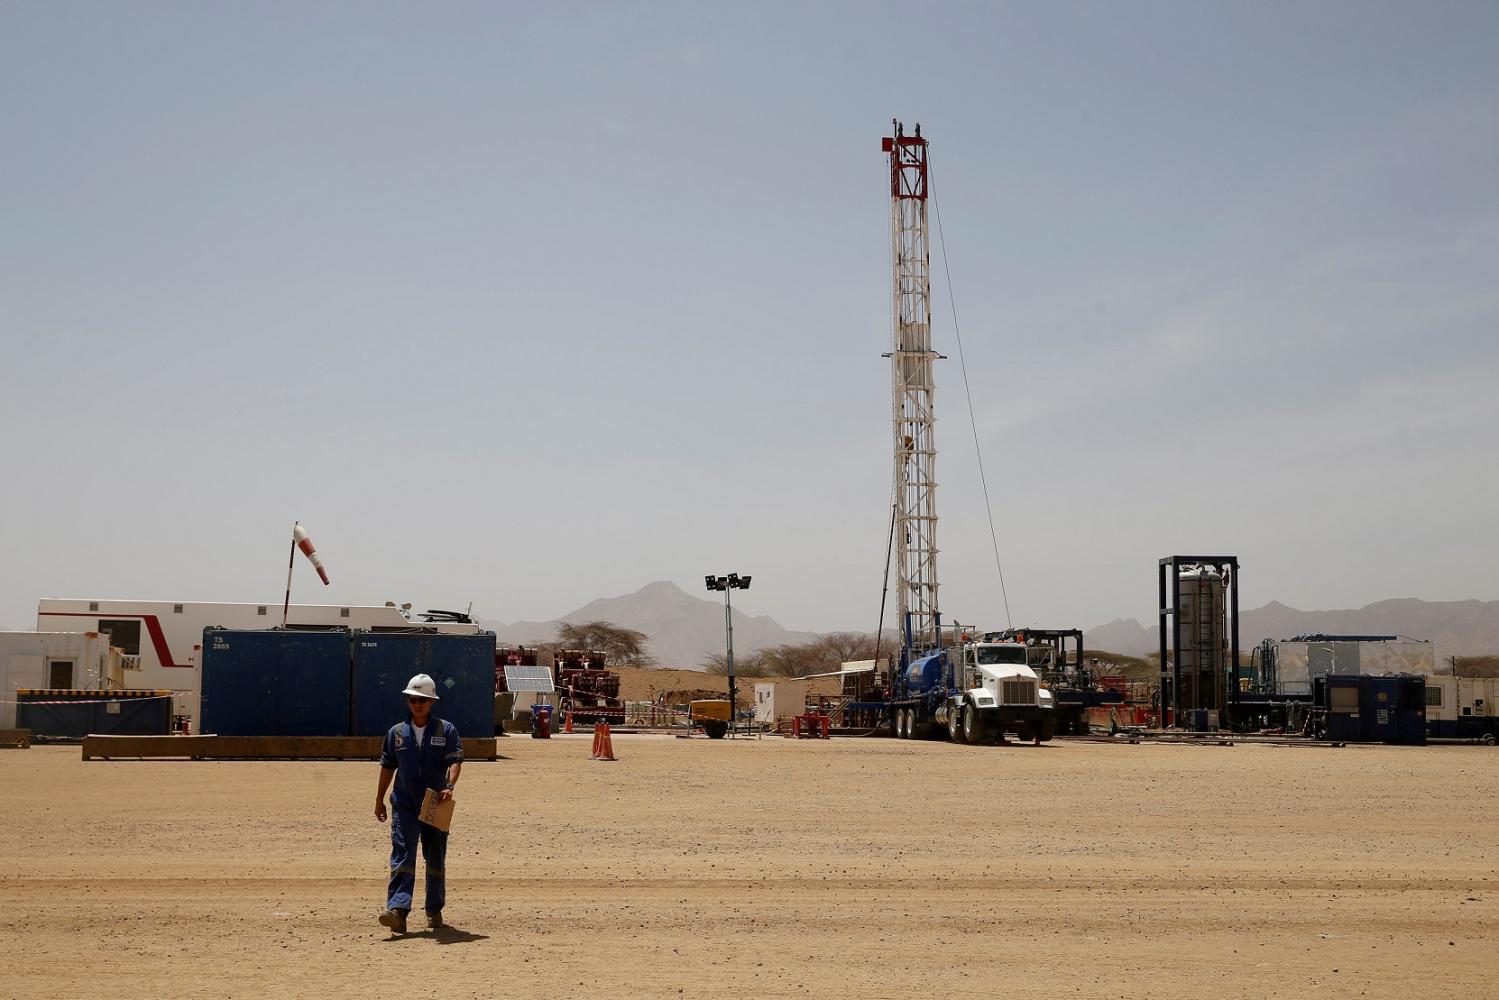 FILE PHOTO: A worker walks at a Tullow Oil explorational drilling site in Lokichar, Turkana County, Kenya, February 8, 2018. REUTERS/Baz Ratner/File Photo - RC1B8C49D650